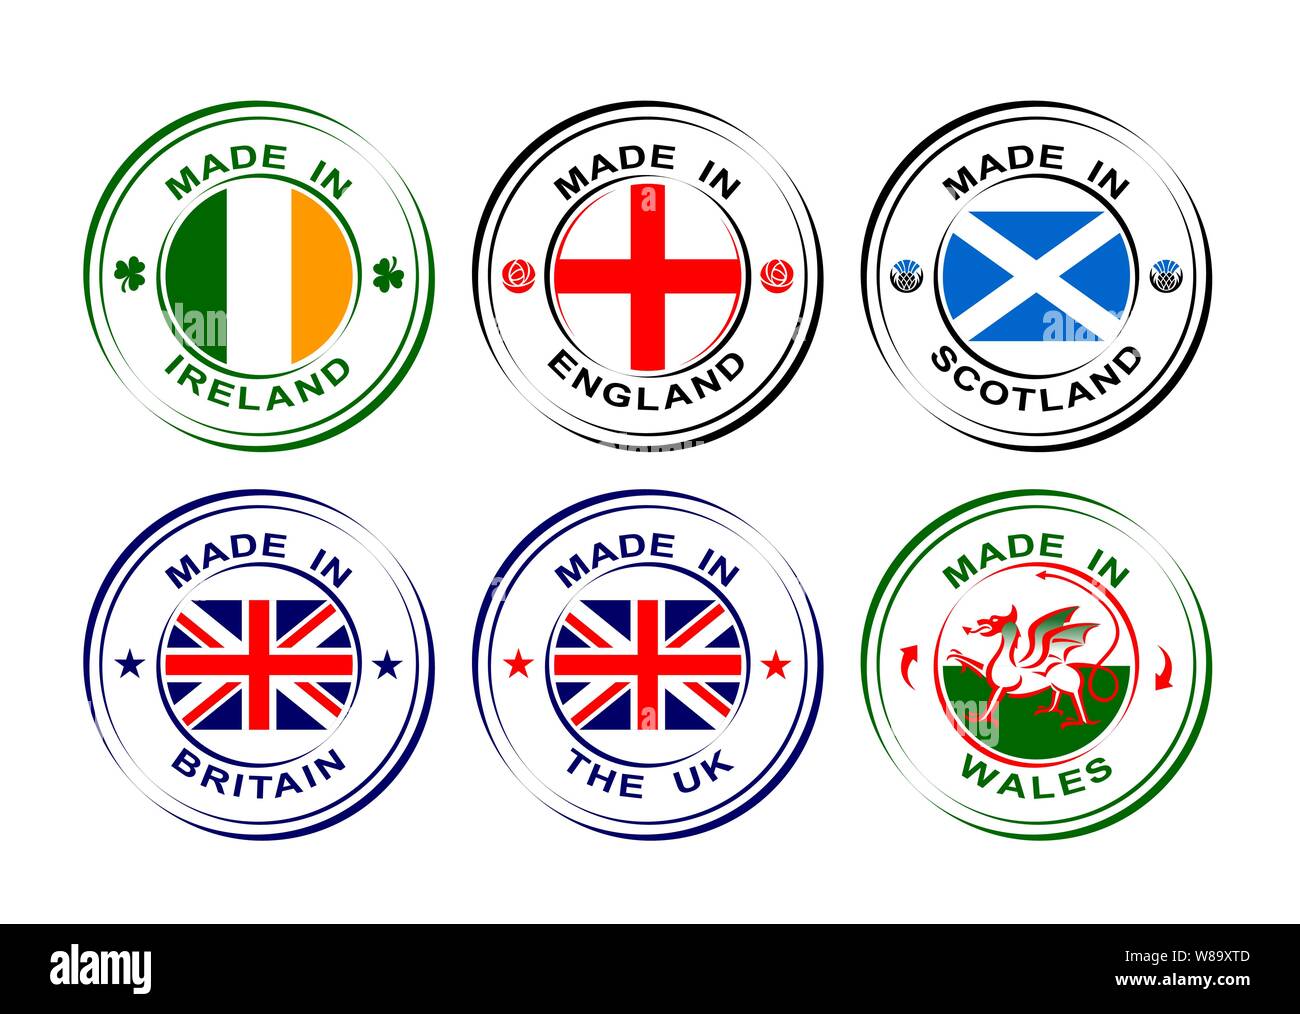 Made in United Kingdom, Great Britain with flag, Wales with dragon, Scotland with thistle, England with rose, Ireland with shamrock Stock Vector